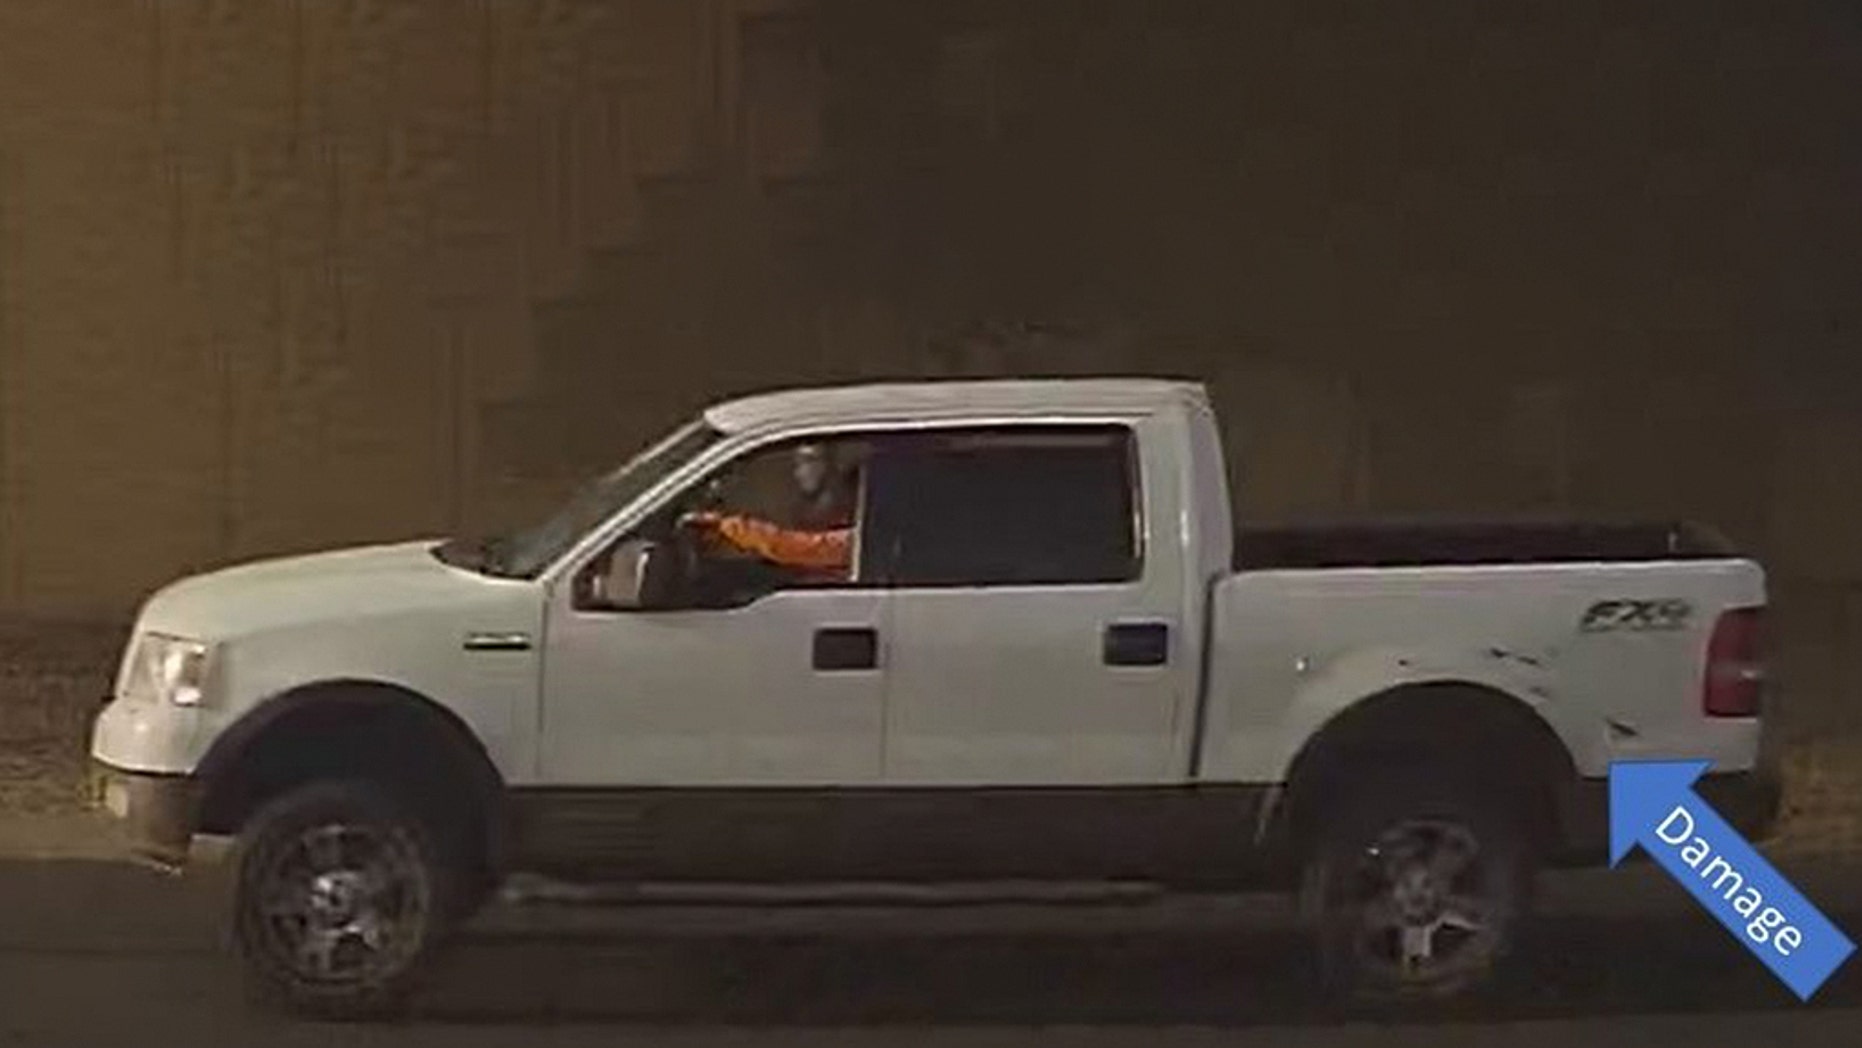 Image of the surveillance video of a damaged white van which, according to Phoenix police, was involved in a shootout on Wednesday that left a 10-year-old girl dead.  